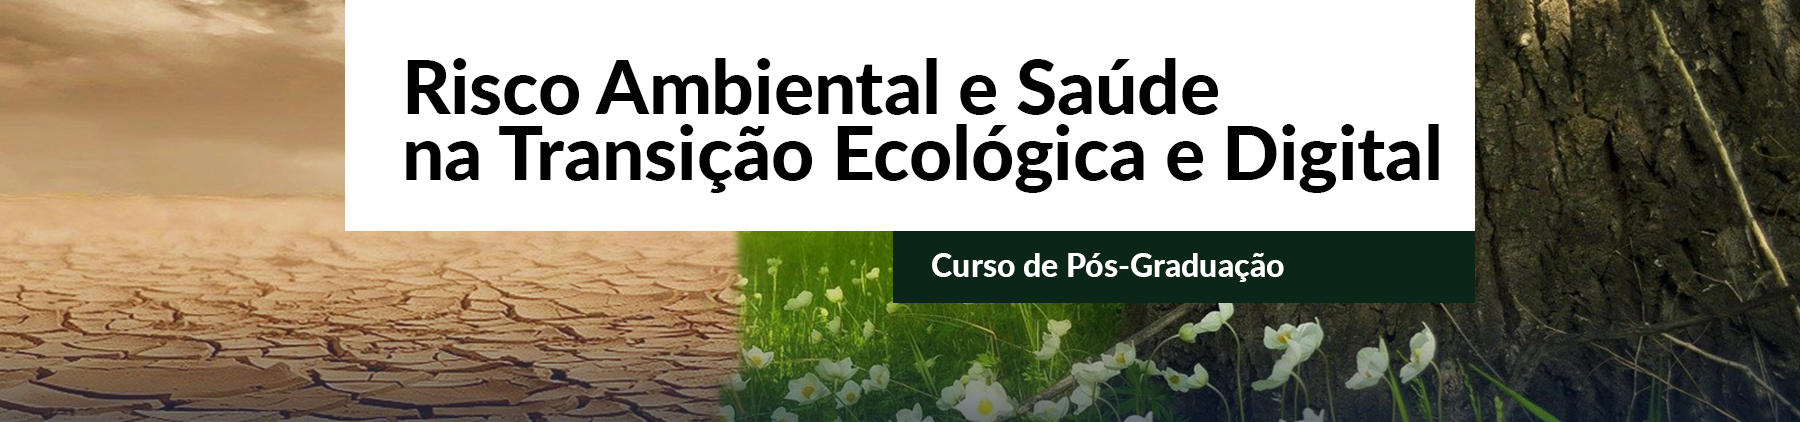 https://www.ff.ulisboa.pt/wp-content/uploads/2022/11/Banner-site-pag-curso_risco-ambiental-1-375x422.png